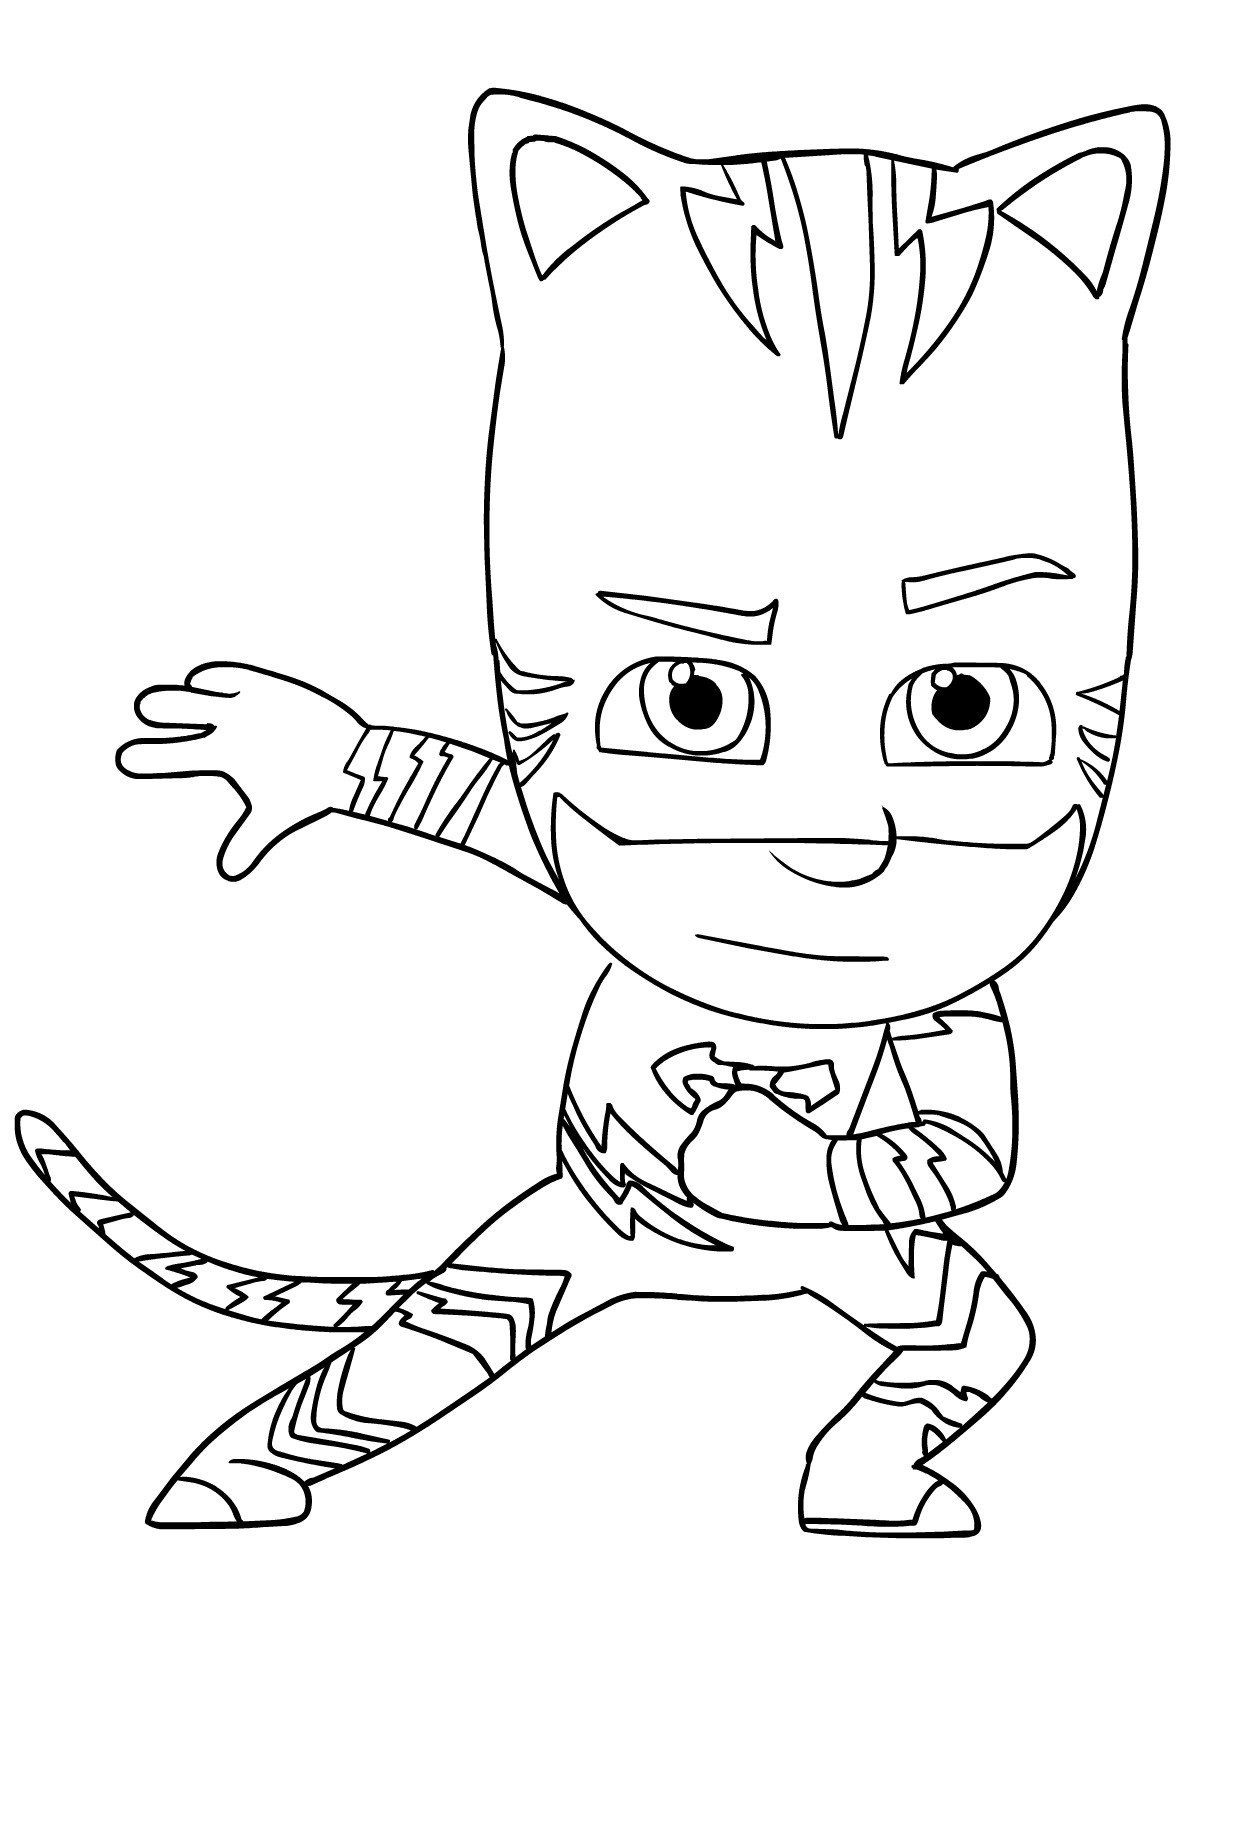 Coloring Pages : Coloring Book Pj Masks Sheets Ideas Free Mask ...